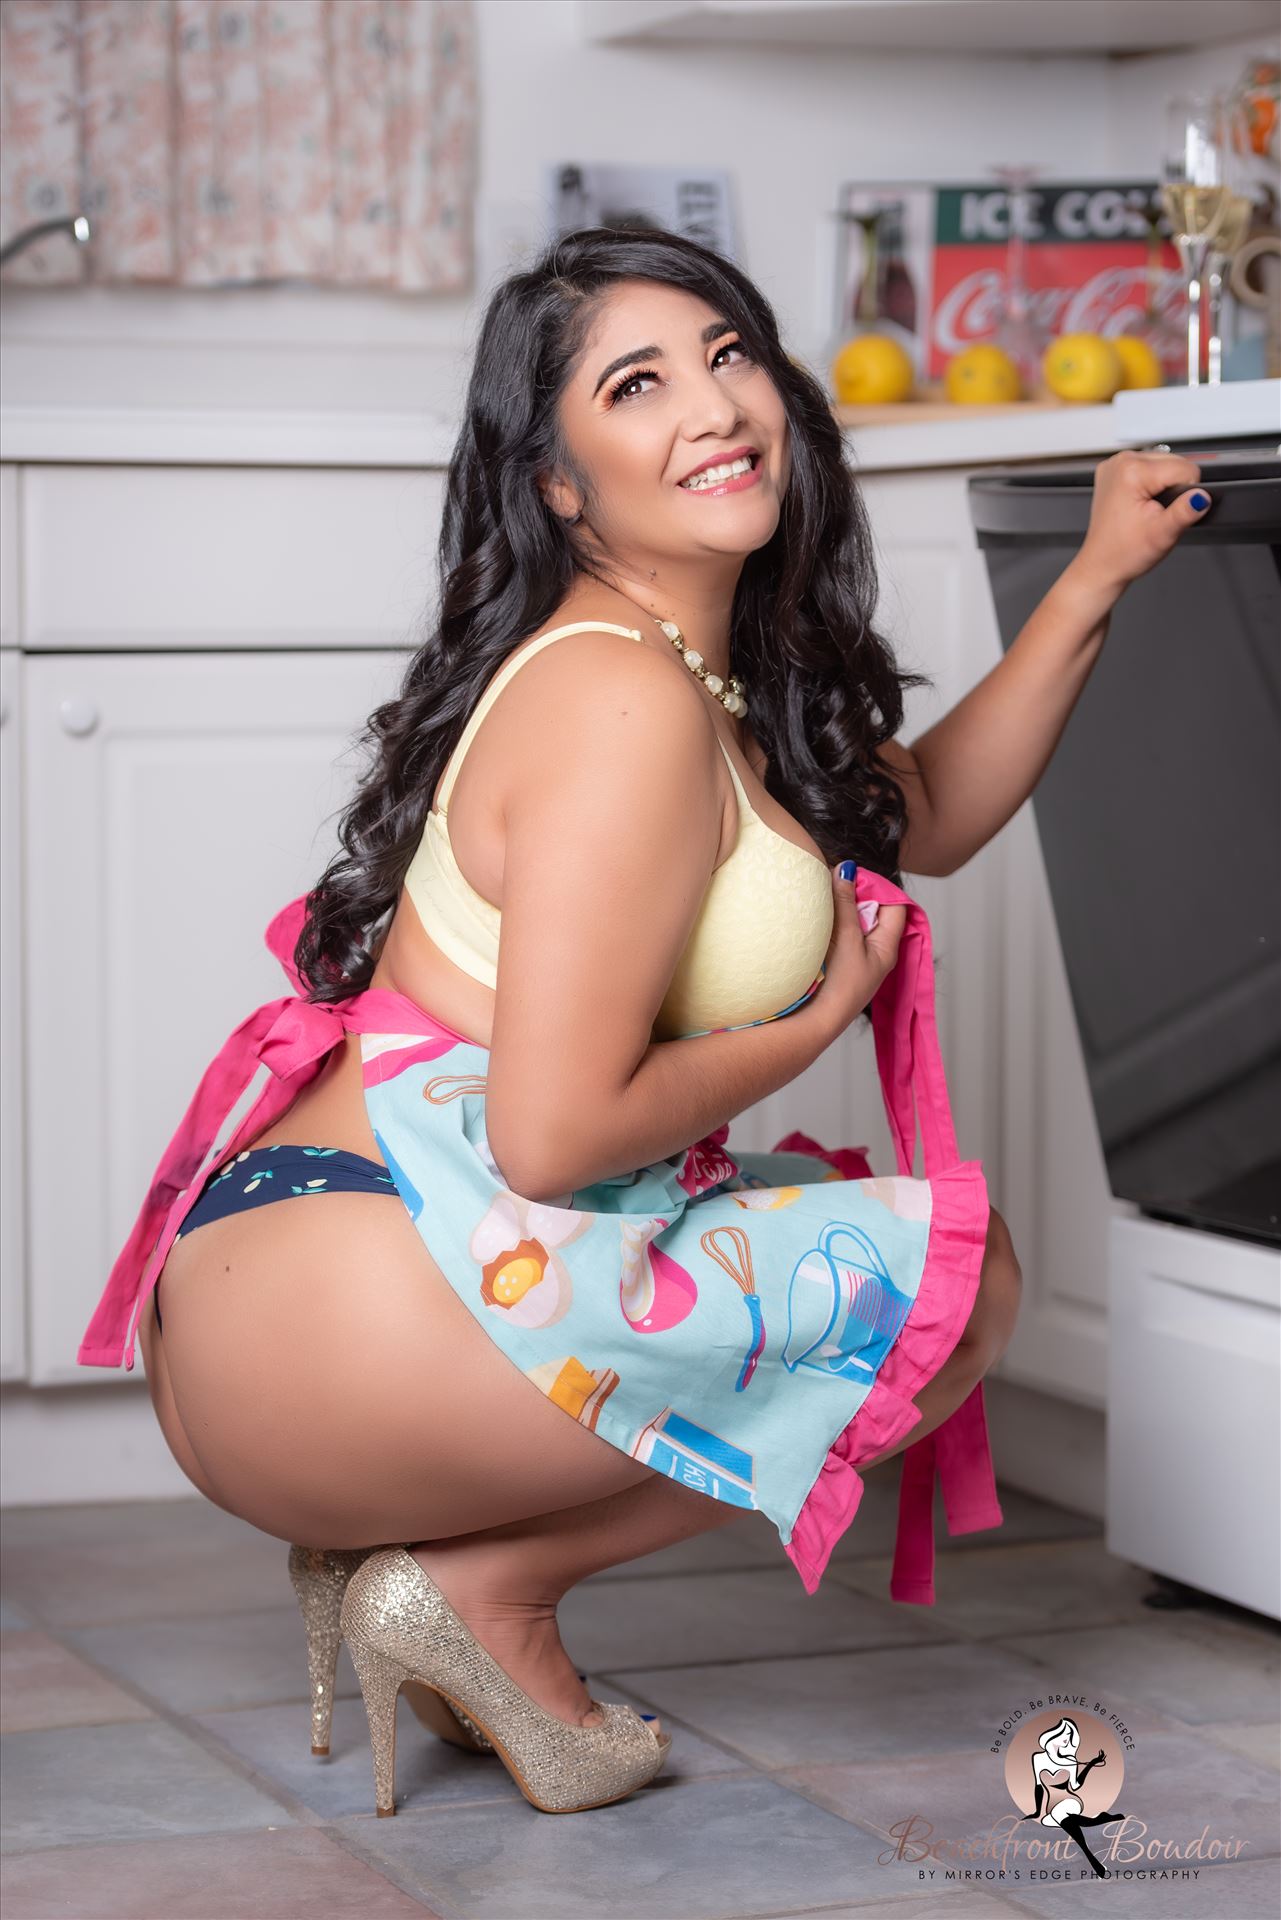 Port-8196.JPG Beachfront Boudoir by Mirror's Edge Photography is a Boutique Luxury Boudoir Photography Studio located just blocks from the beach in Oceano, California. My mission is to show as many women as possible how beautiful they truly are! Pin Up kitchen. by Sarah Williams